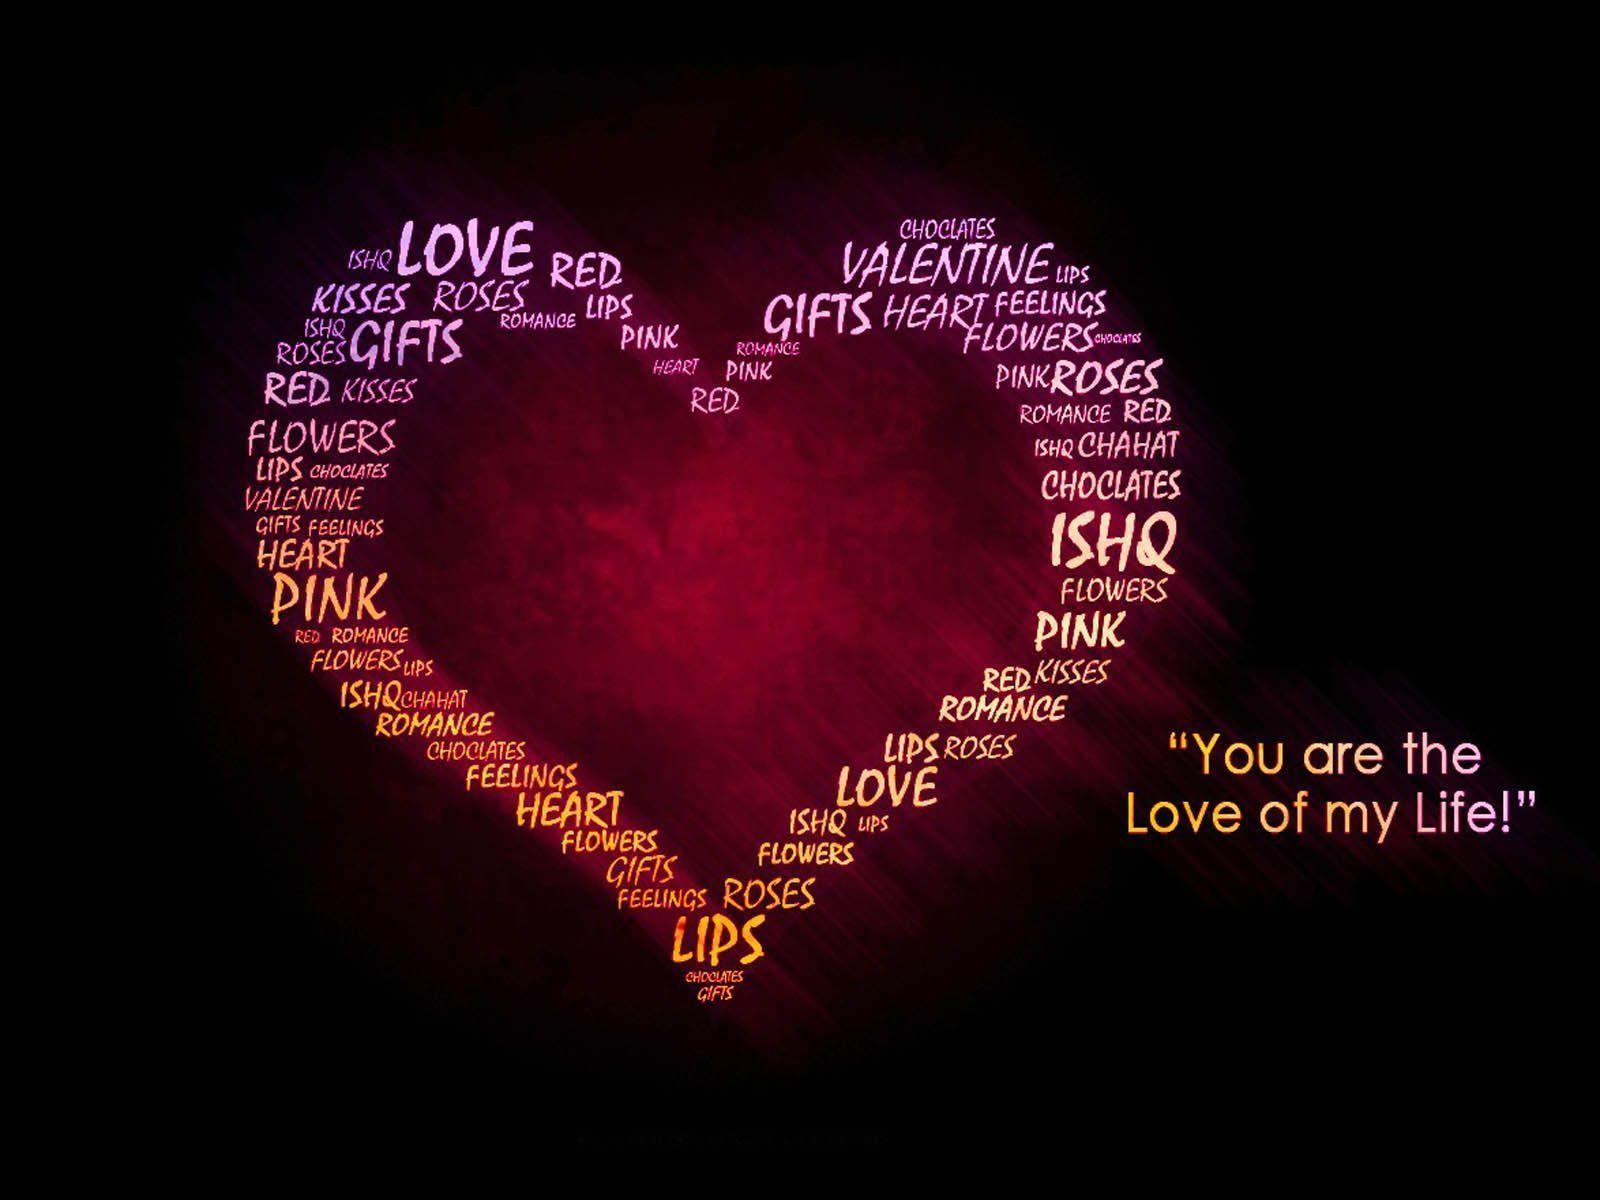 Wallpaper Desktop Love Quotes HD Picture 4 HD Wallpaper. Hdimges